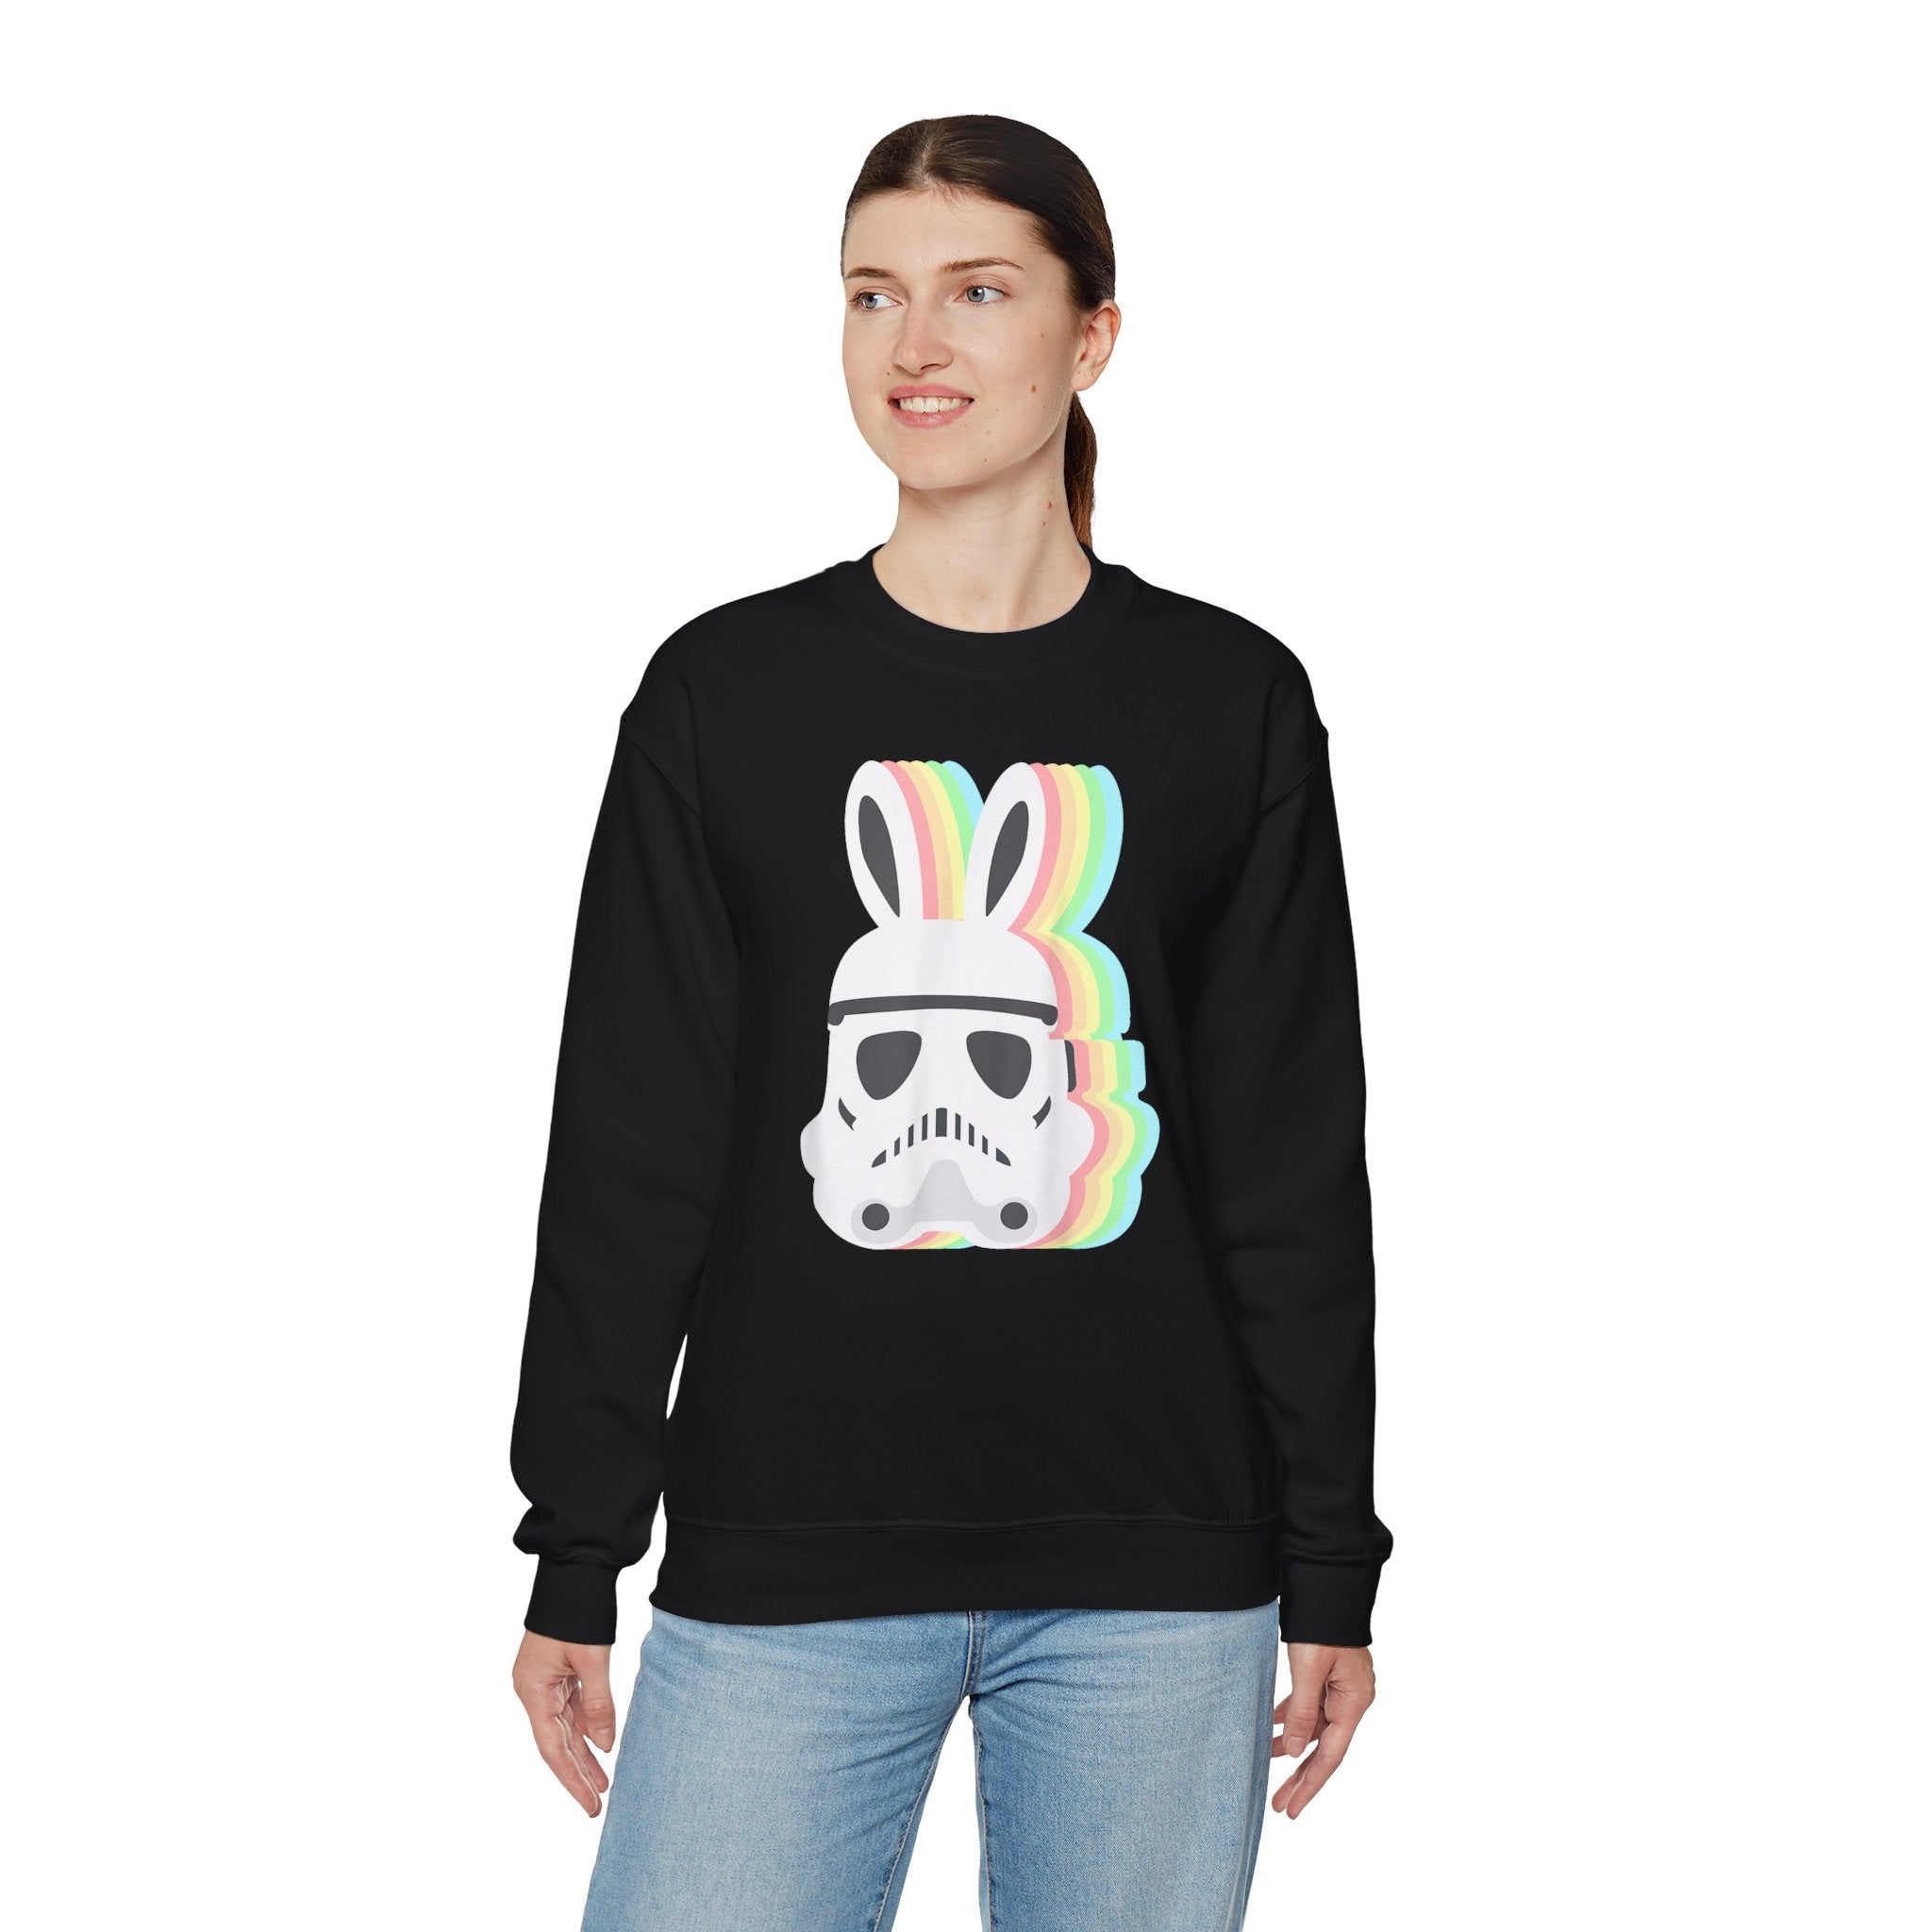 Person wearing a black Star Wars Easter Stormtrooper - Sweatshirt featuring an Easter Stormtrooper helmet with rainbow bunny ears, standing against a plain white background.